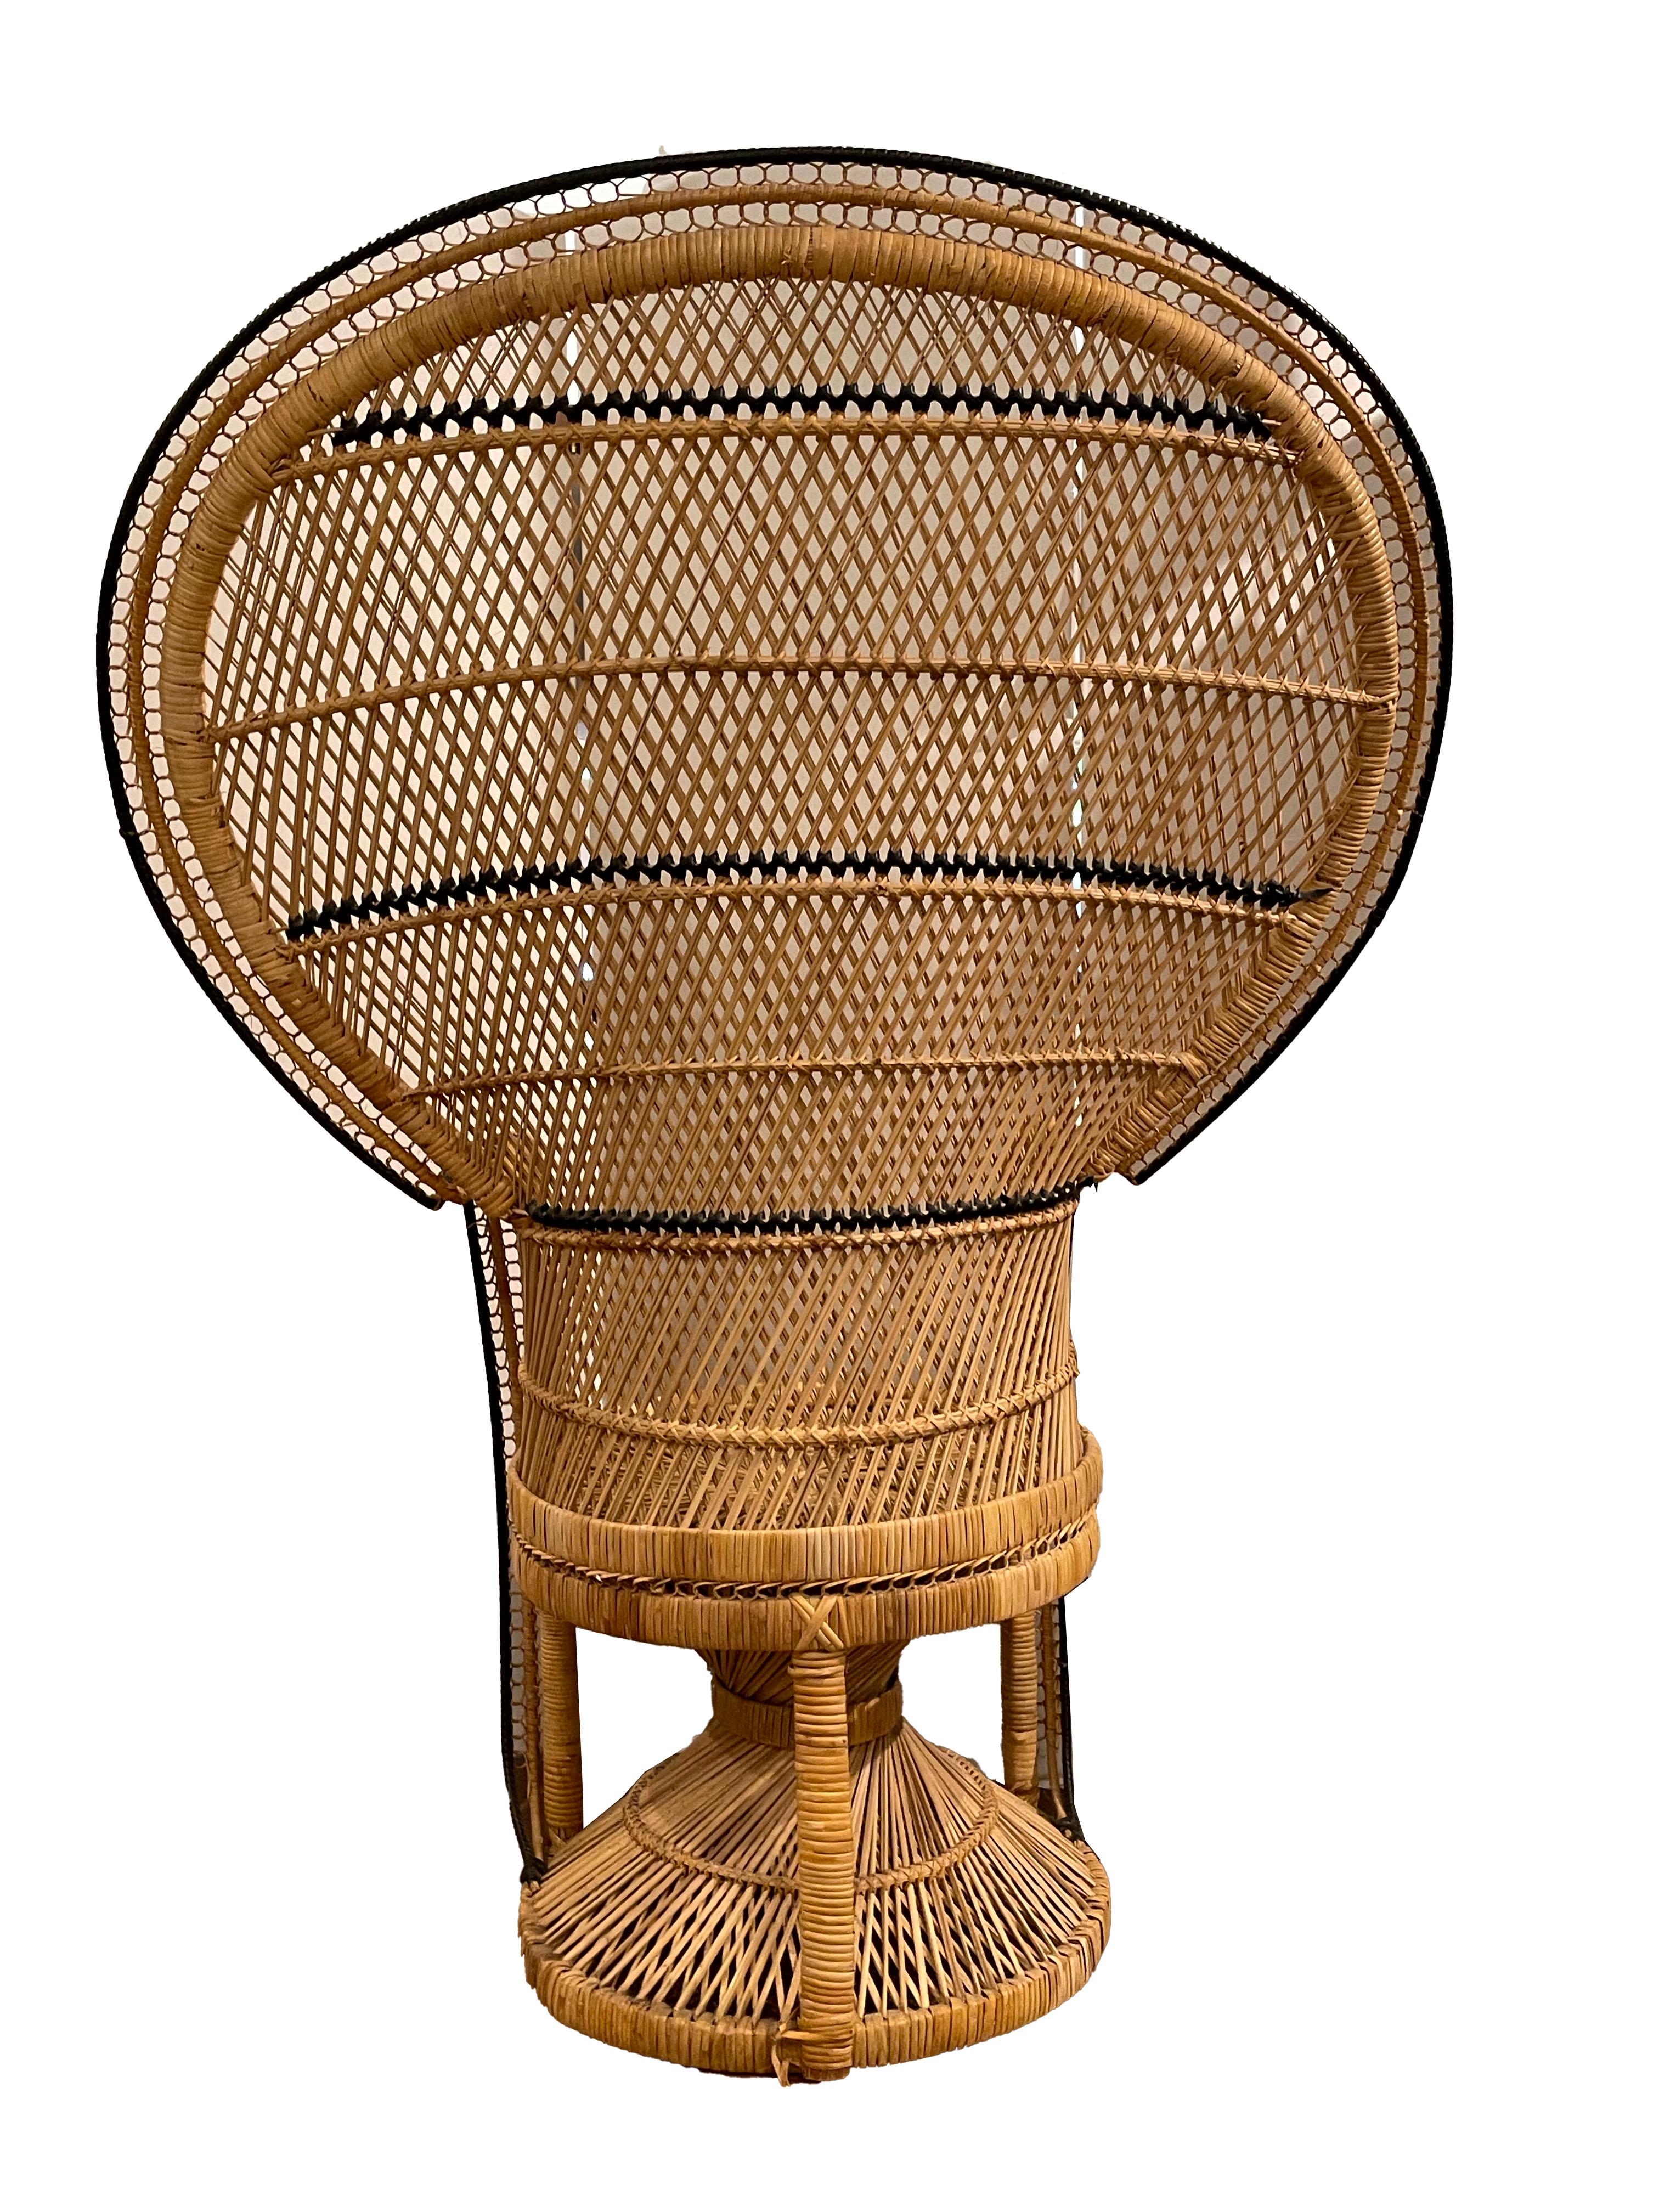 This vintage boho 1970's peacock chair is a great example of this era. The chair is in great condition with black detail woven into the rattan.